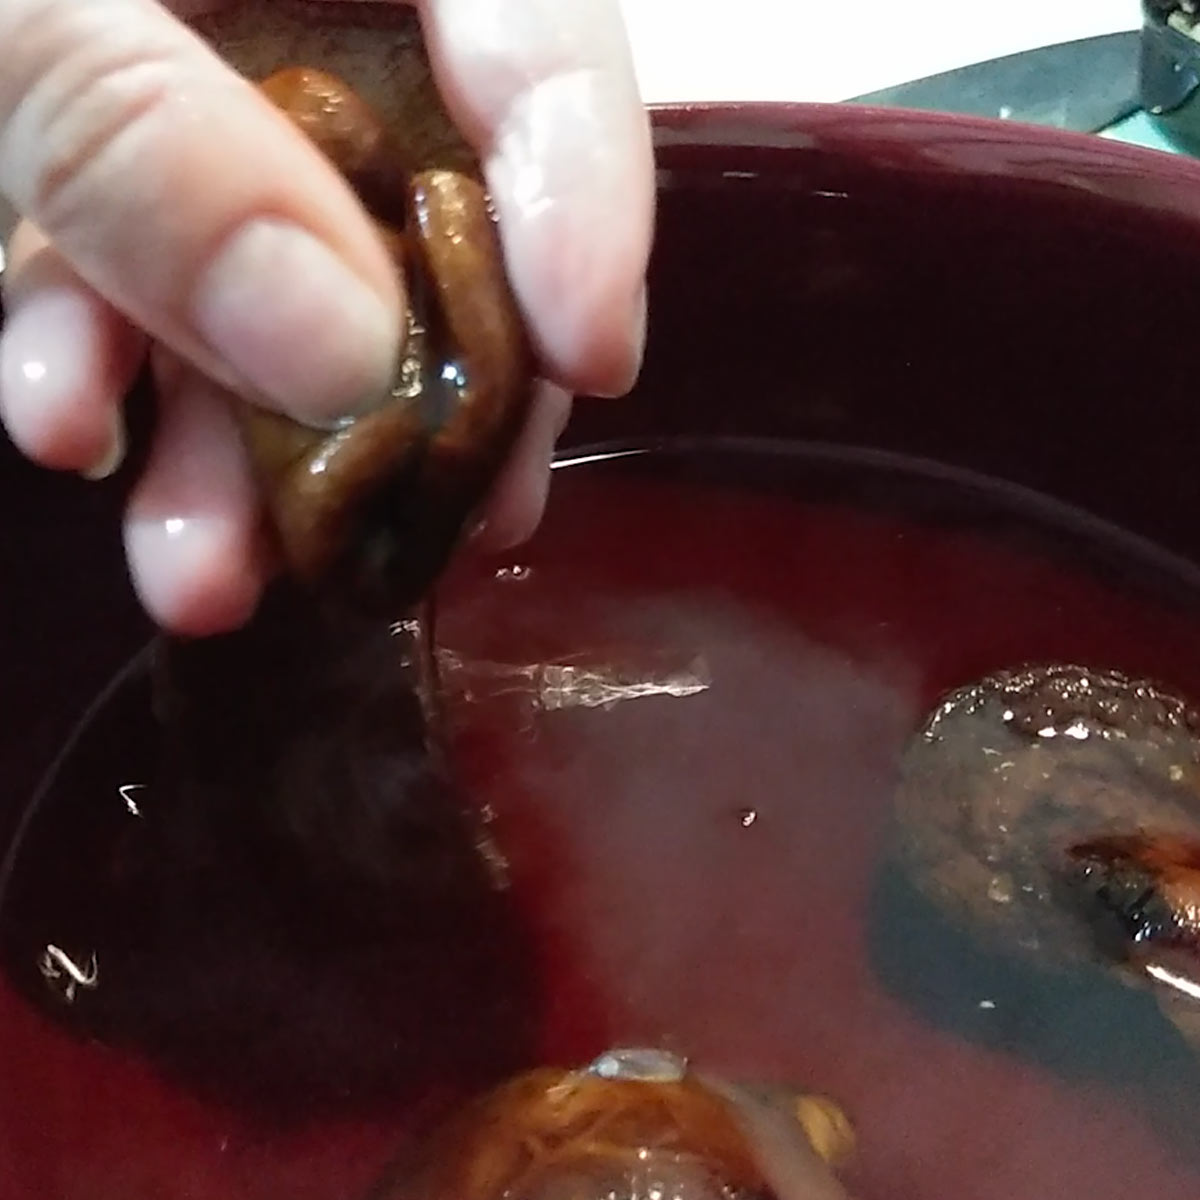 squeezing out water from the shiitake mushrooms